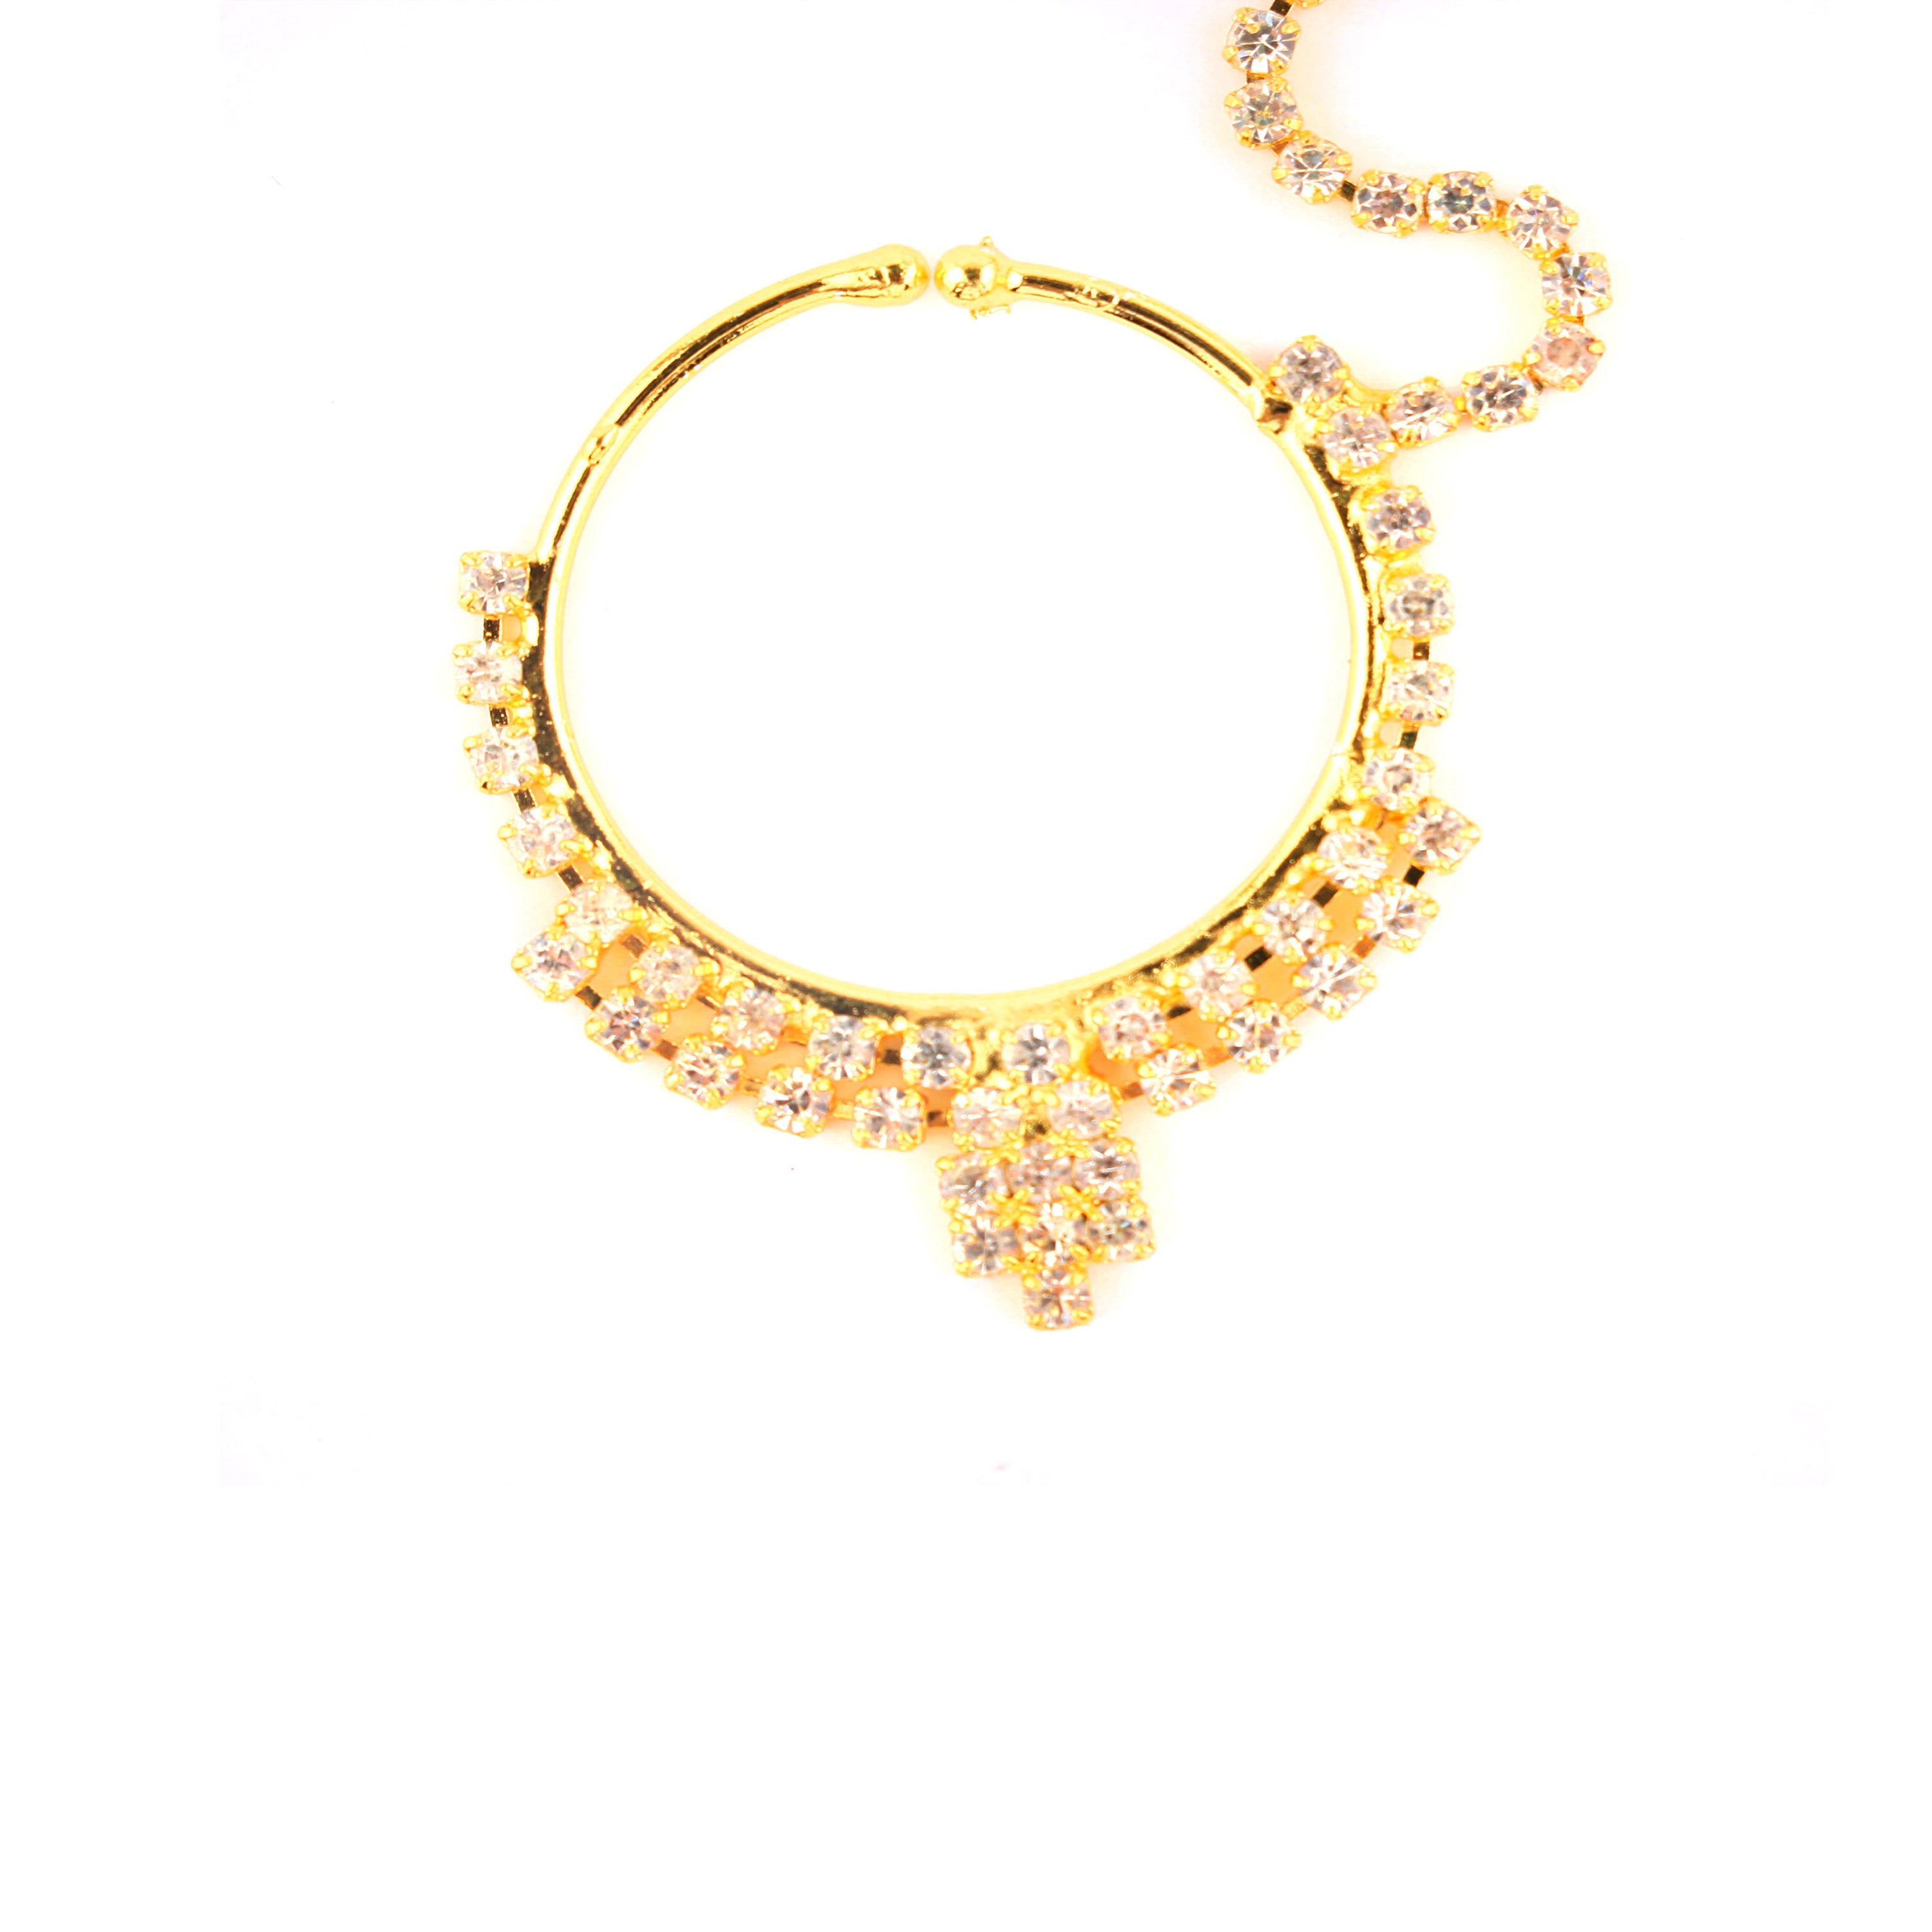 Abhinn Traditional Designer Gold Plated Large Hoop Nose ring with CZ Crystal Stones for Women Online